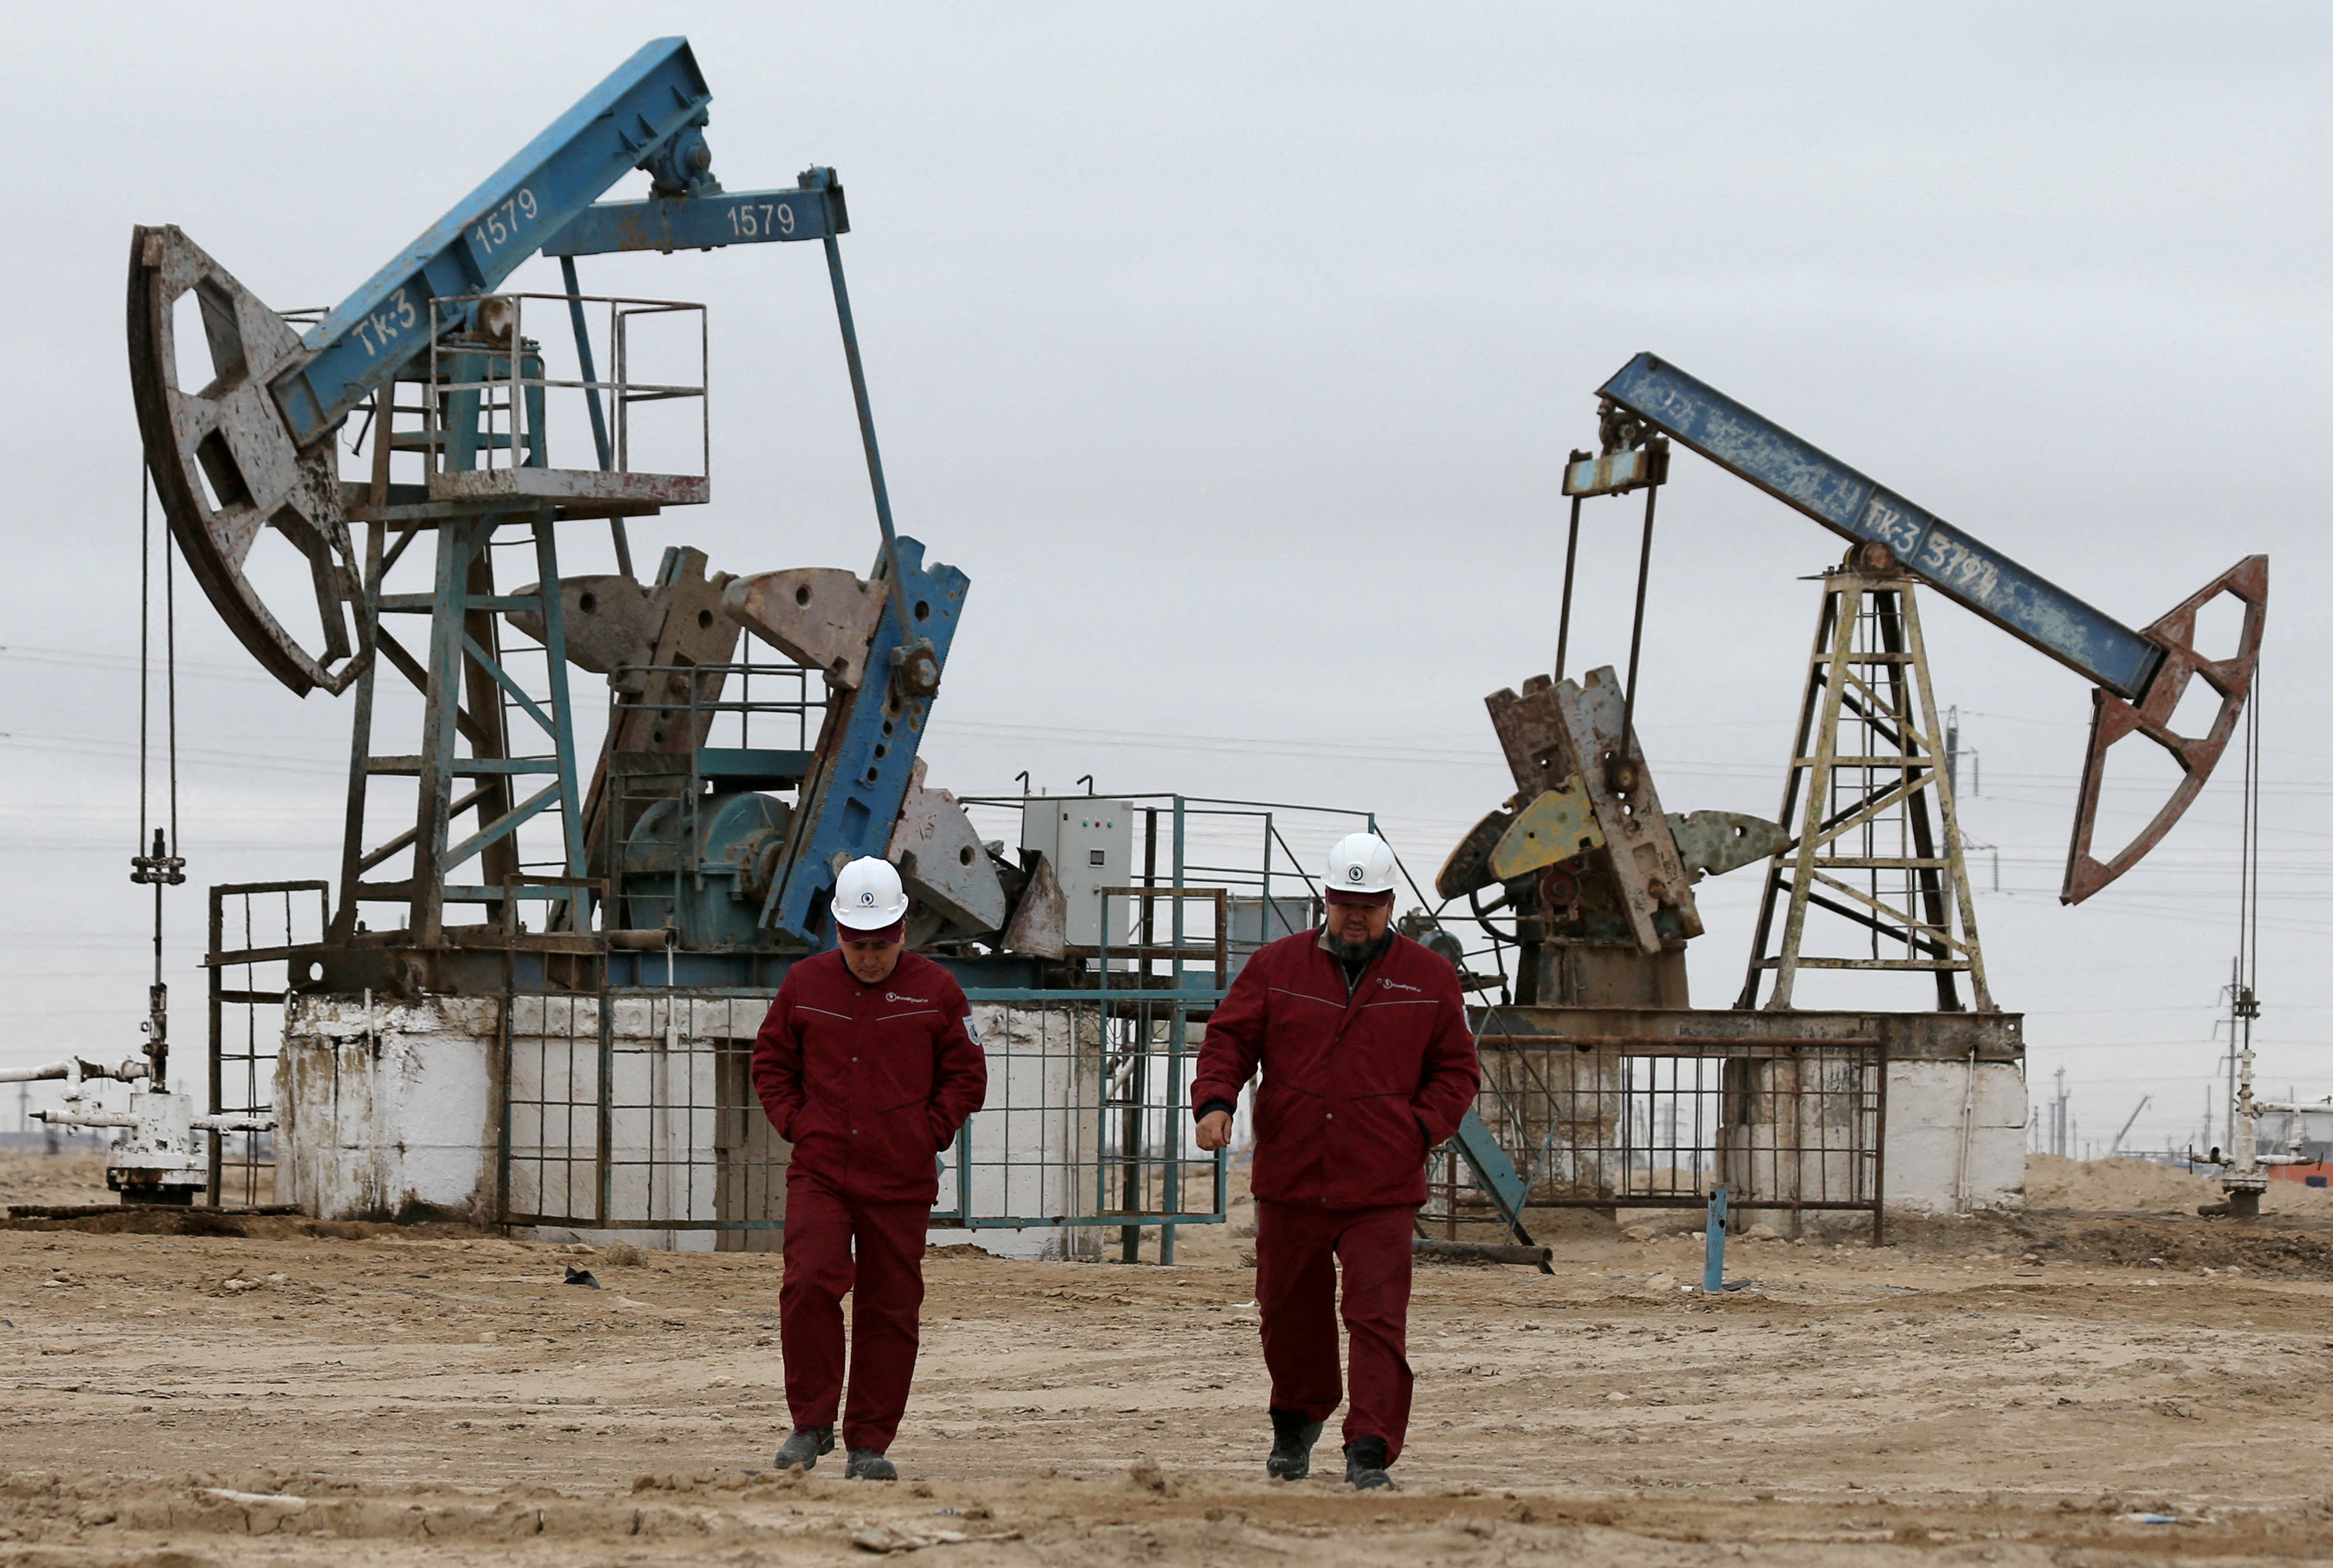 Workers walk as oil pumps are seen in the background in the Uzen oil and gas field in the Mangistau Region